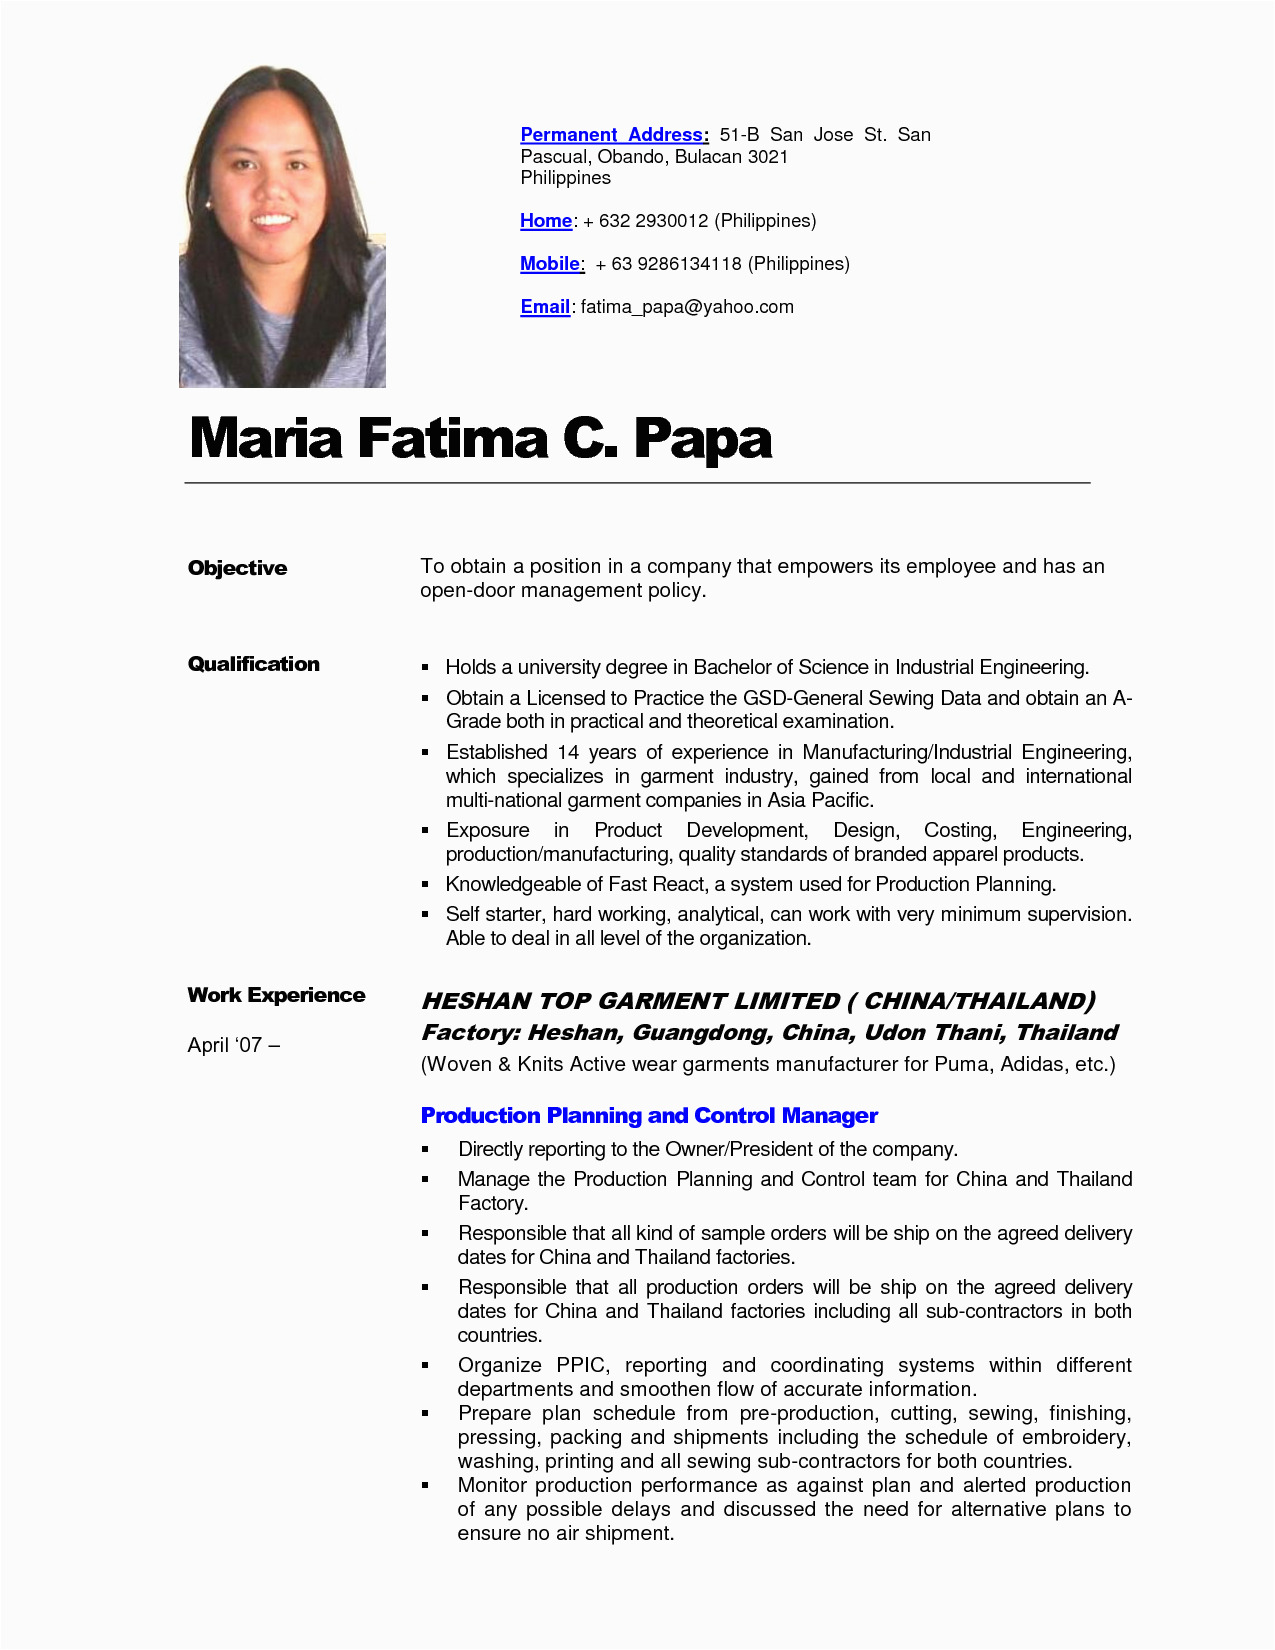 Sample Resume format for Nurses In the Philippines Biodata format Philippines – Salescvfo